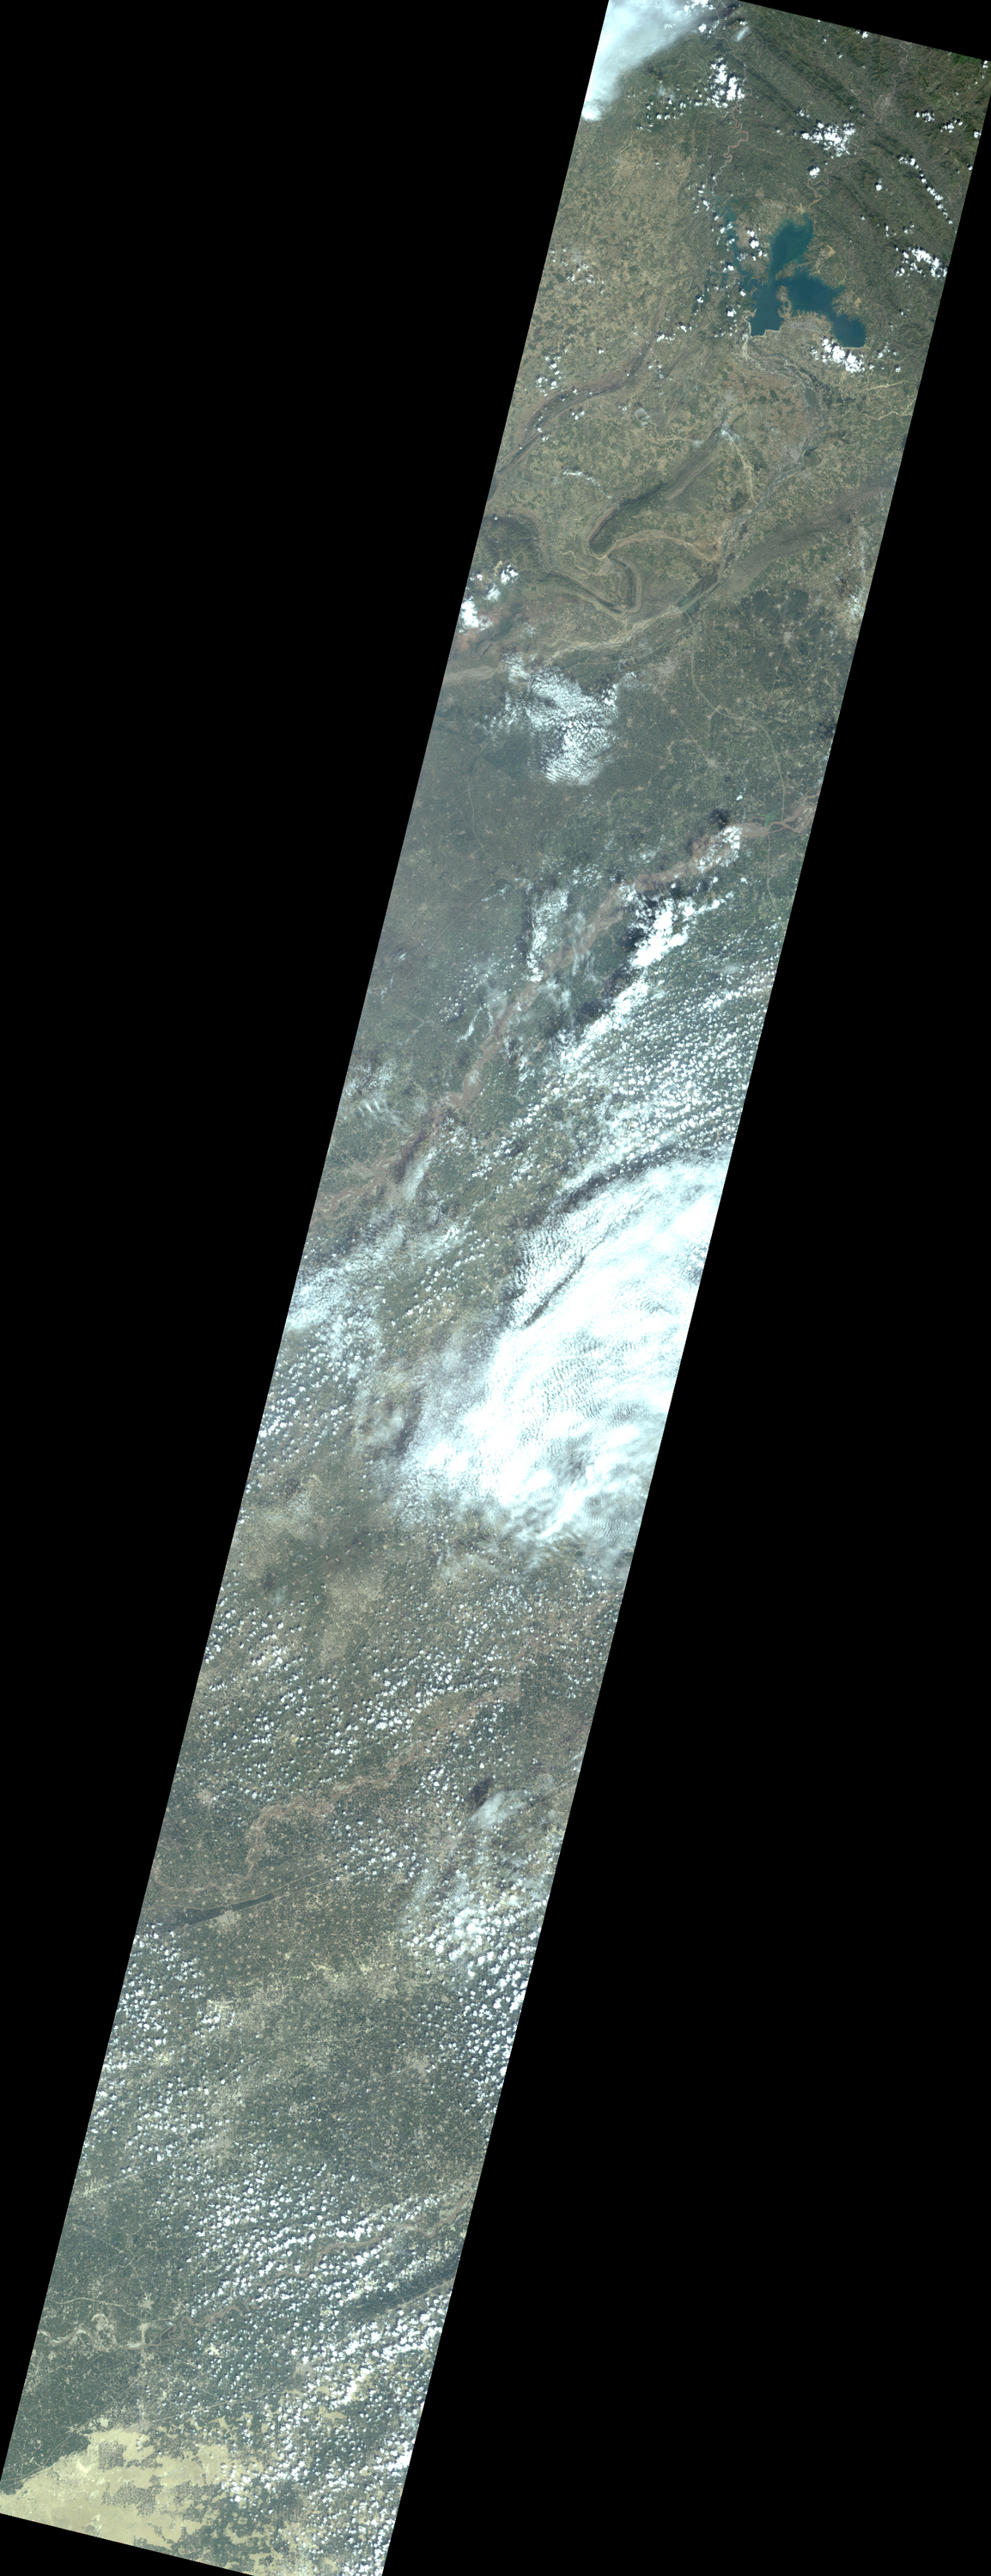 Fig.1(True color): AVNIR-2 image with 0.0 degree pointing angle acquired 14:56 (JST) or 5:56 (UTC) on September 13, 2010 (JST).